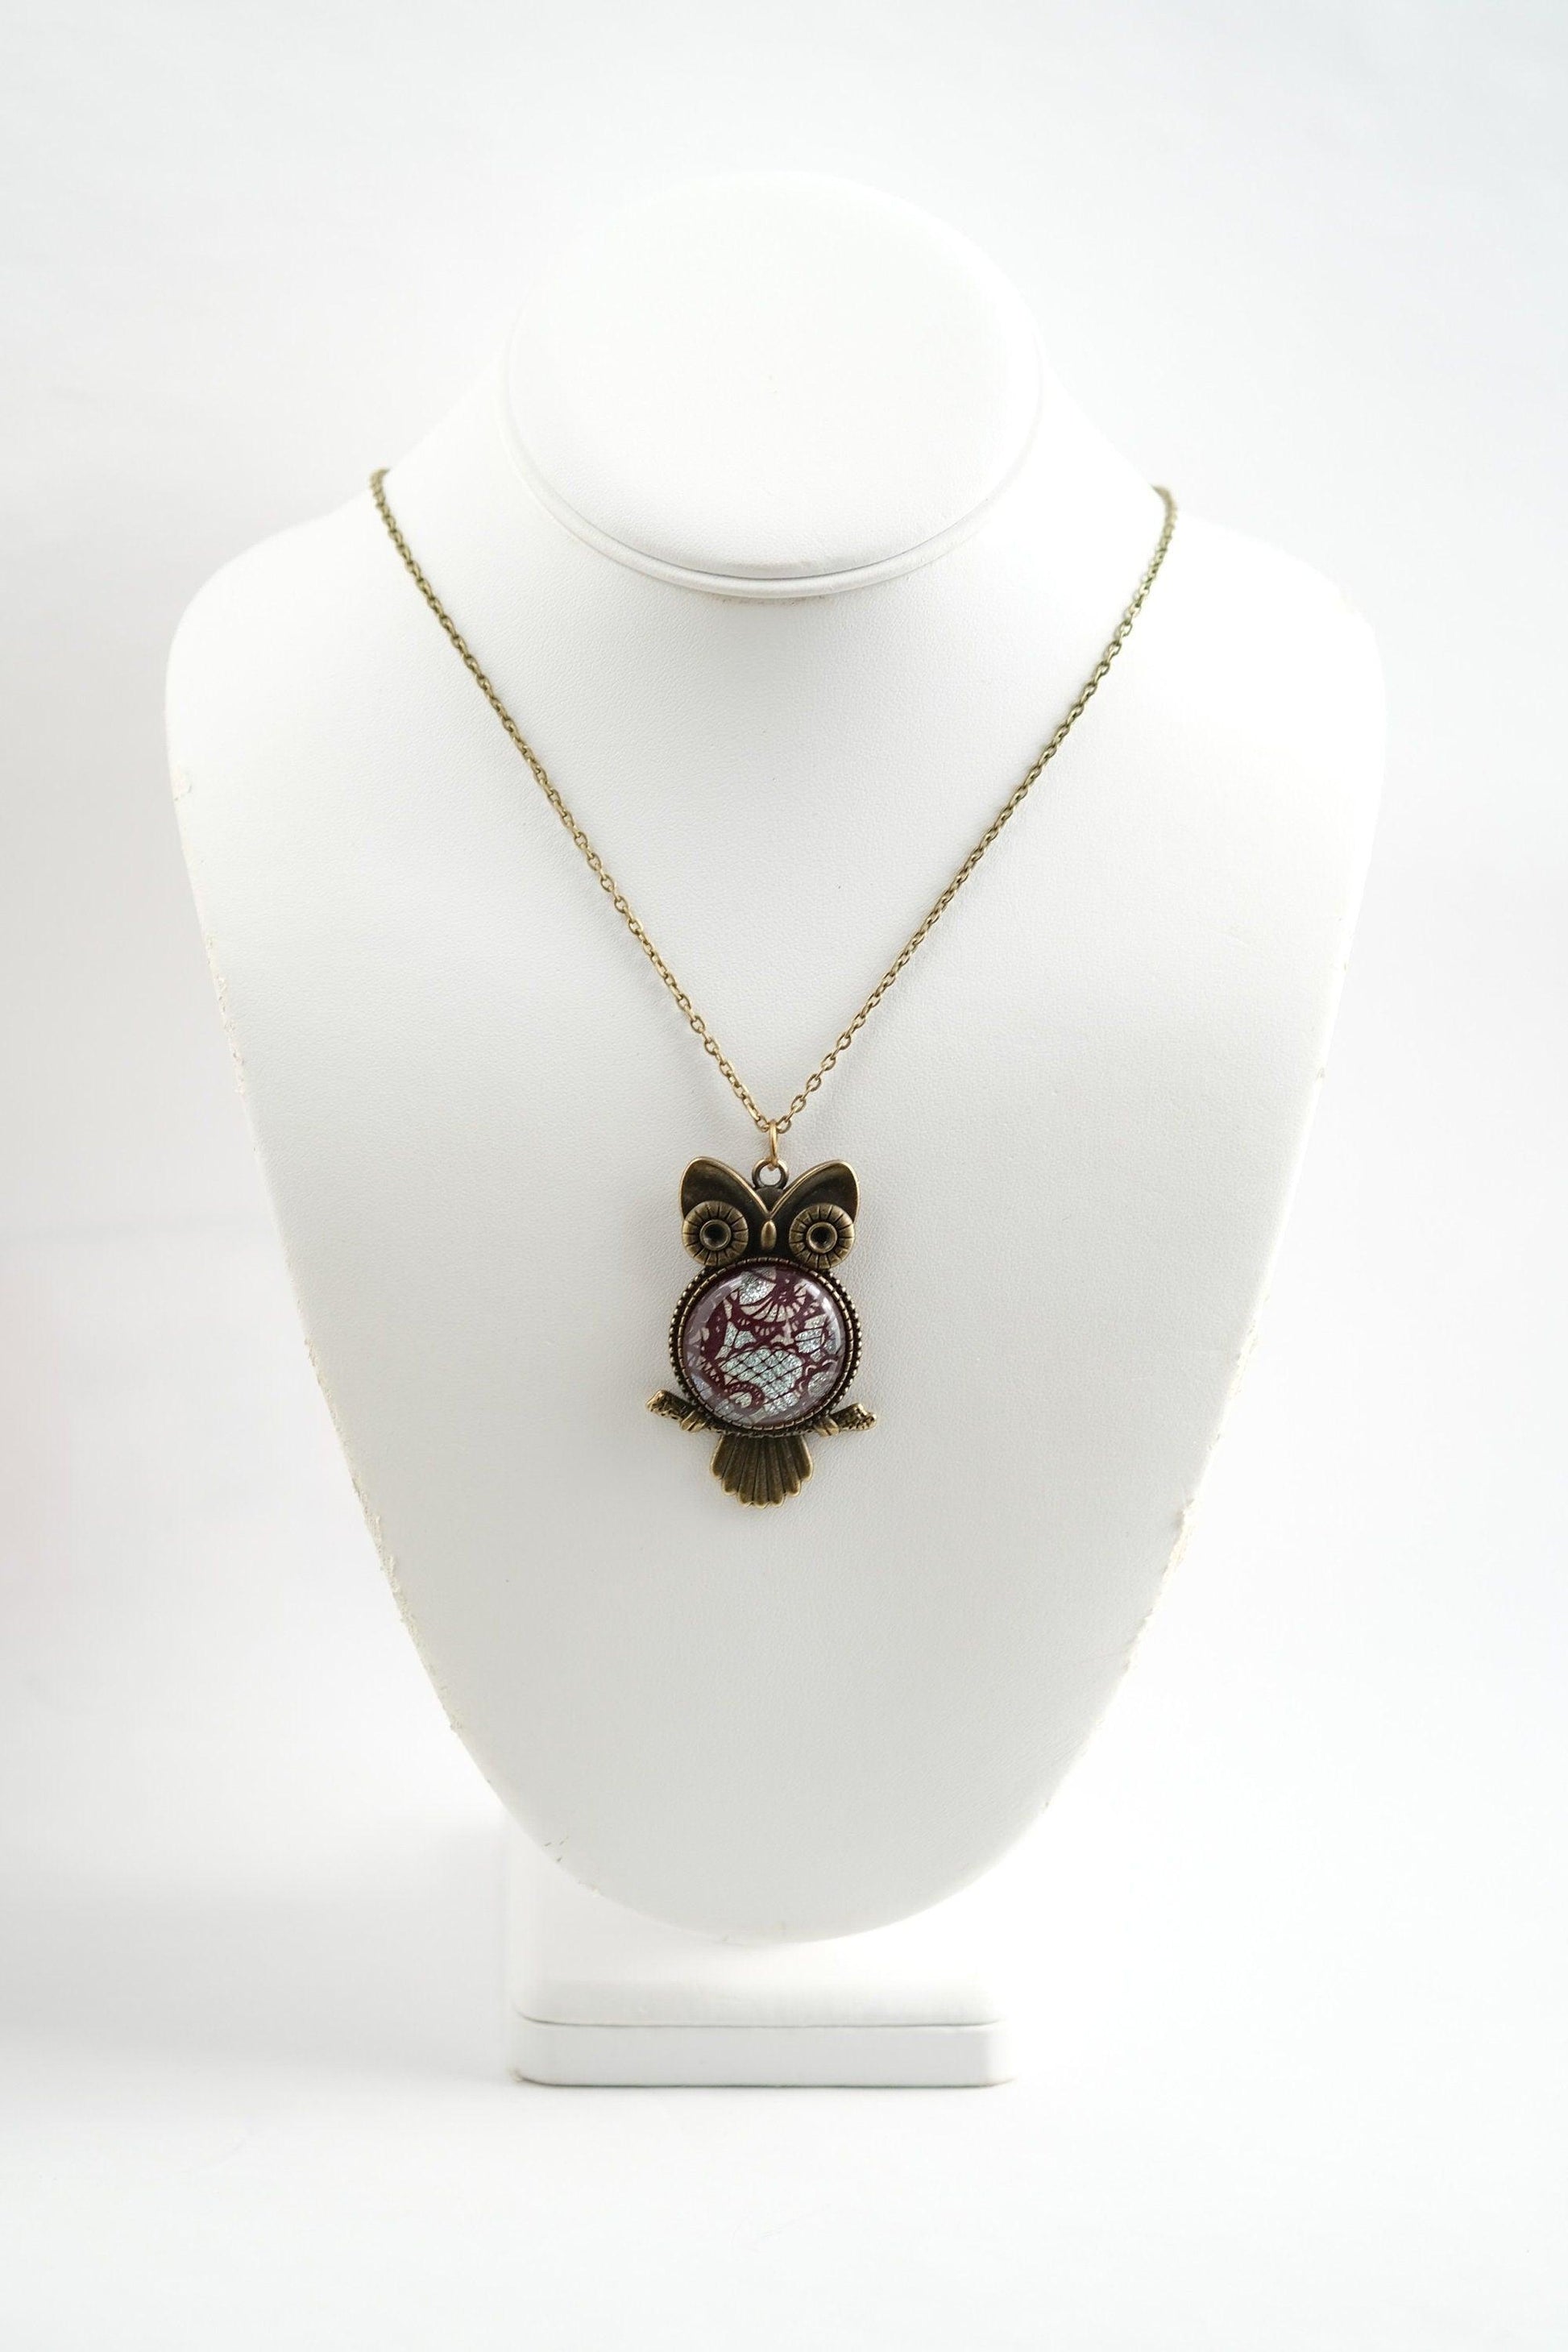 Bronze Owl Pendant Necklace with Stunning Red Lace Dichroic Fused Glass Center Stone - 20 inch Chain seeds glassworks seedsglassworks